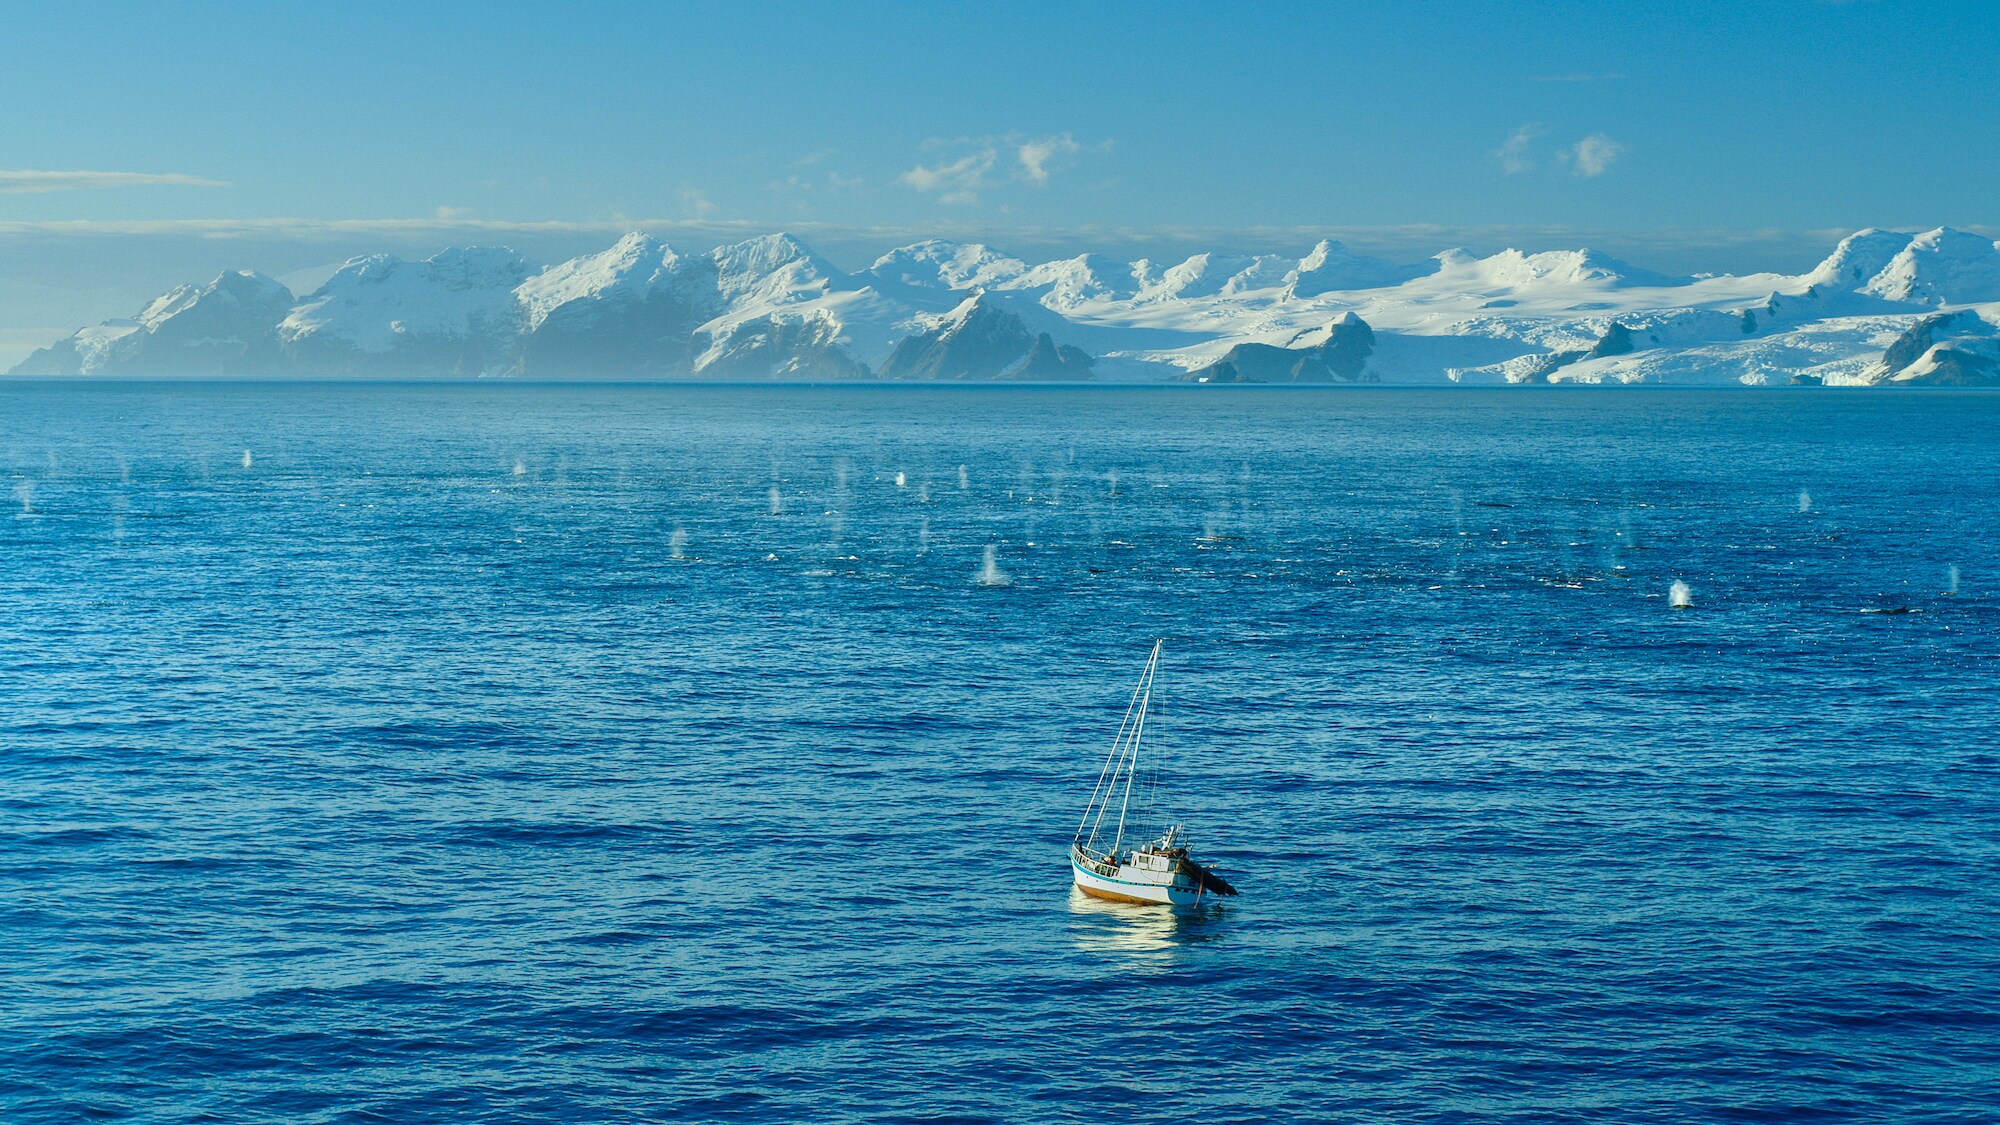 Research and filming yacht, Australis, approaches a gathering of fin whales off Elephant Island. (Credit: National Geographic/Bertie Gregory for Disney+)